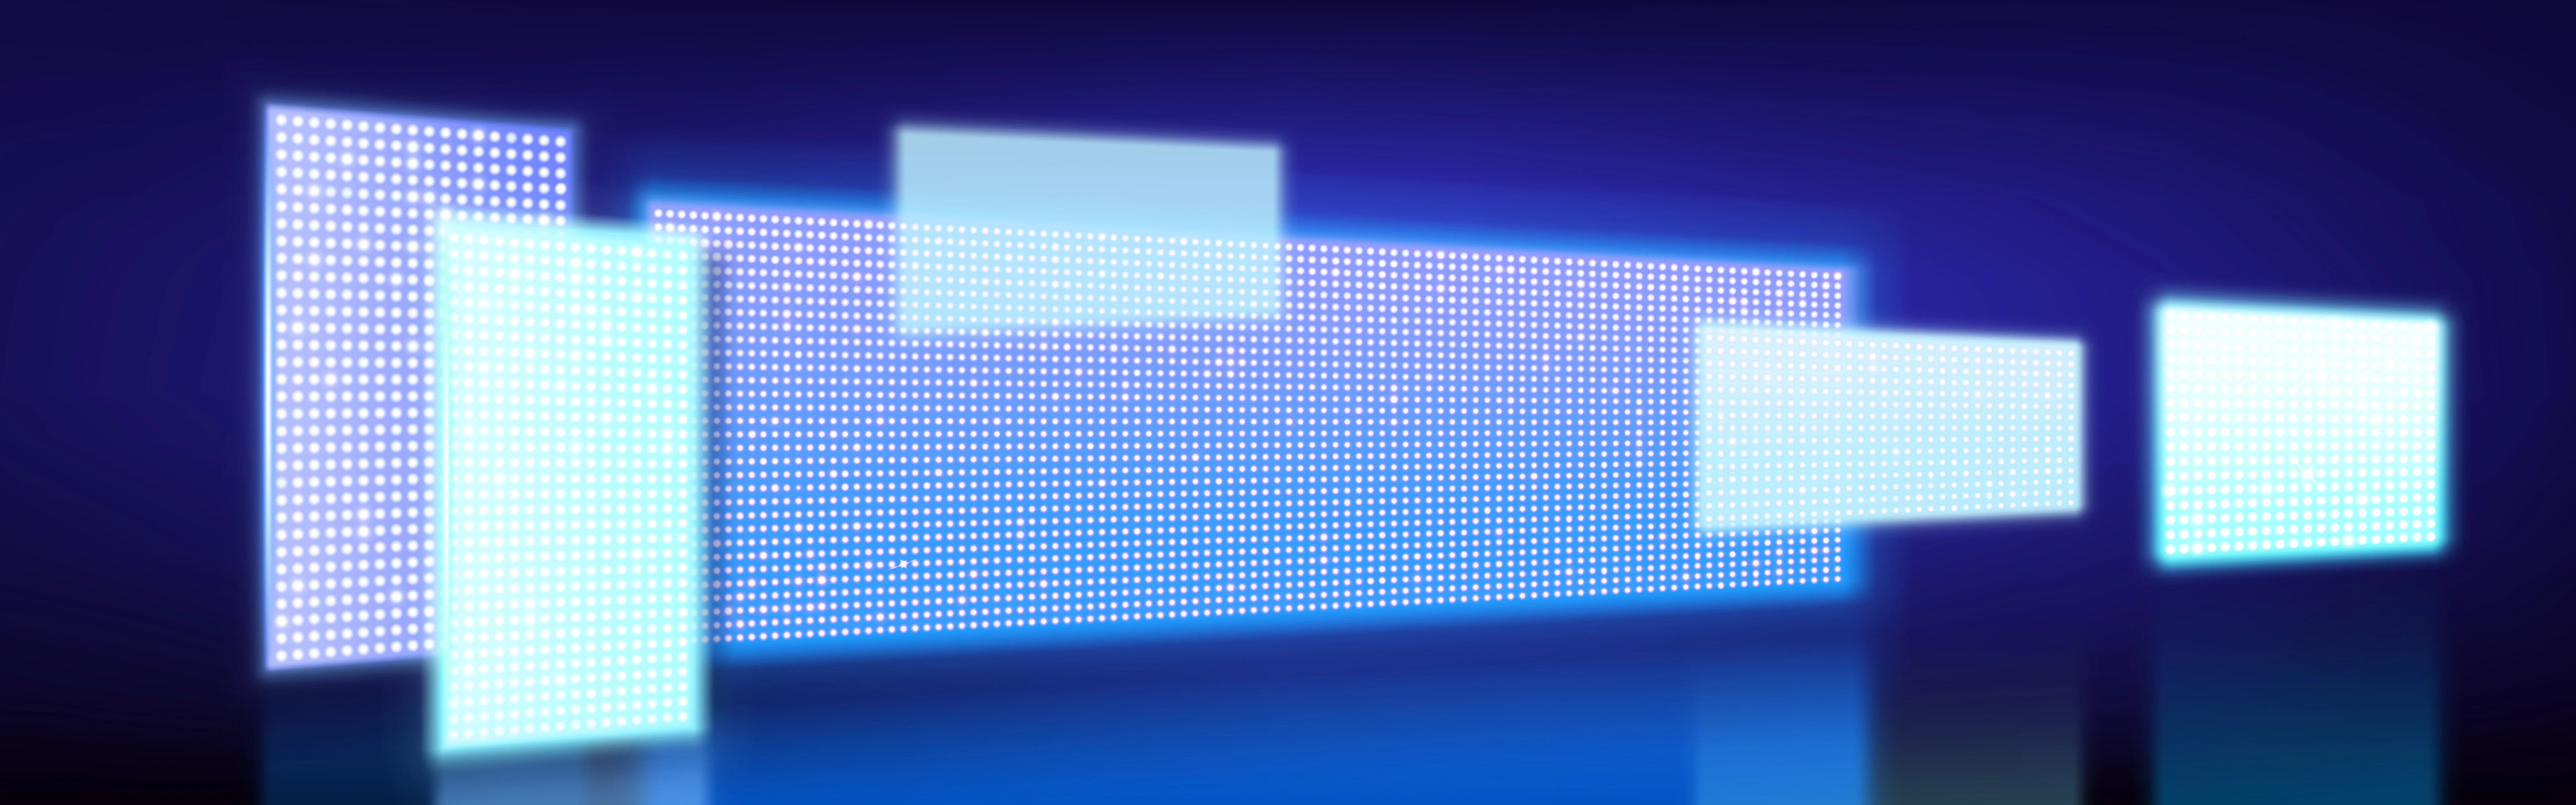 Many different forms of LED Displays.